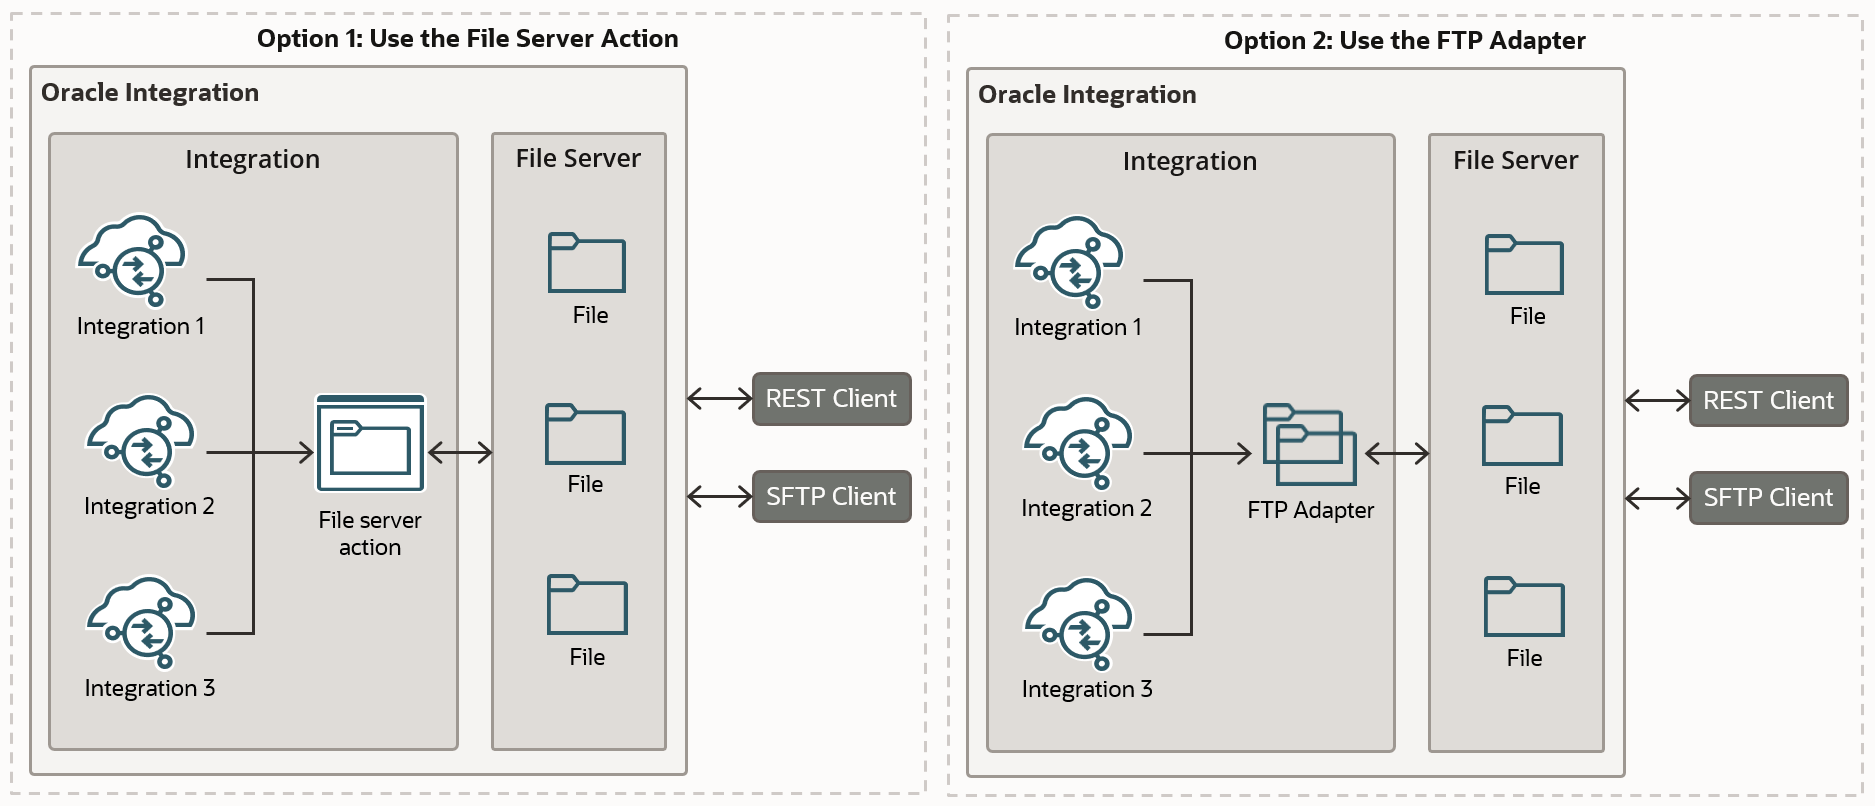 Two primary boxes appear. The title of the first primary box is Option 1: Use the File Server Action. Within this box, Oracle Integration is illustrated as a box that contains two other boxes: Integration and File Server. Within the Integration box are 3 integrations, which point to the File server action. A two-way arrow connects the File server action and the File Server box. The File Server box contains an SFTP server, which is connected to 3 files. Two-way arrows connect Oracle Integration with a REST Client and SFTP Client. The title of the second primary box is Option 2: Use the FTP Adapter. This box is identical to the first primary box, except the FTP Adapter appears in place of the FIle server action.